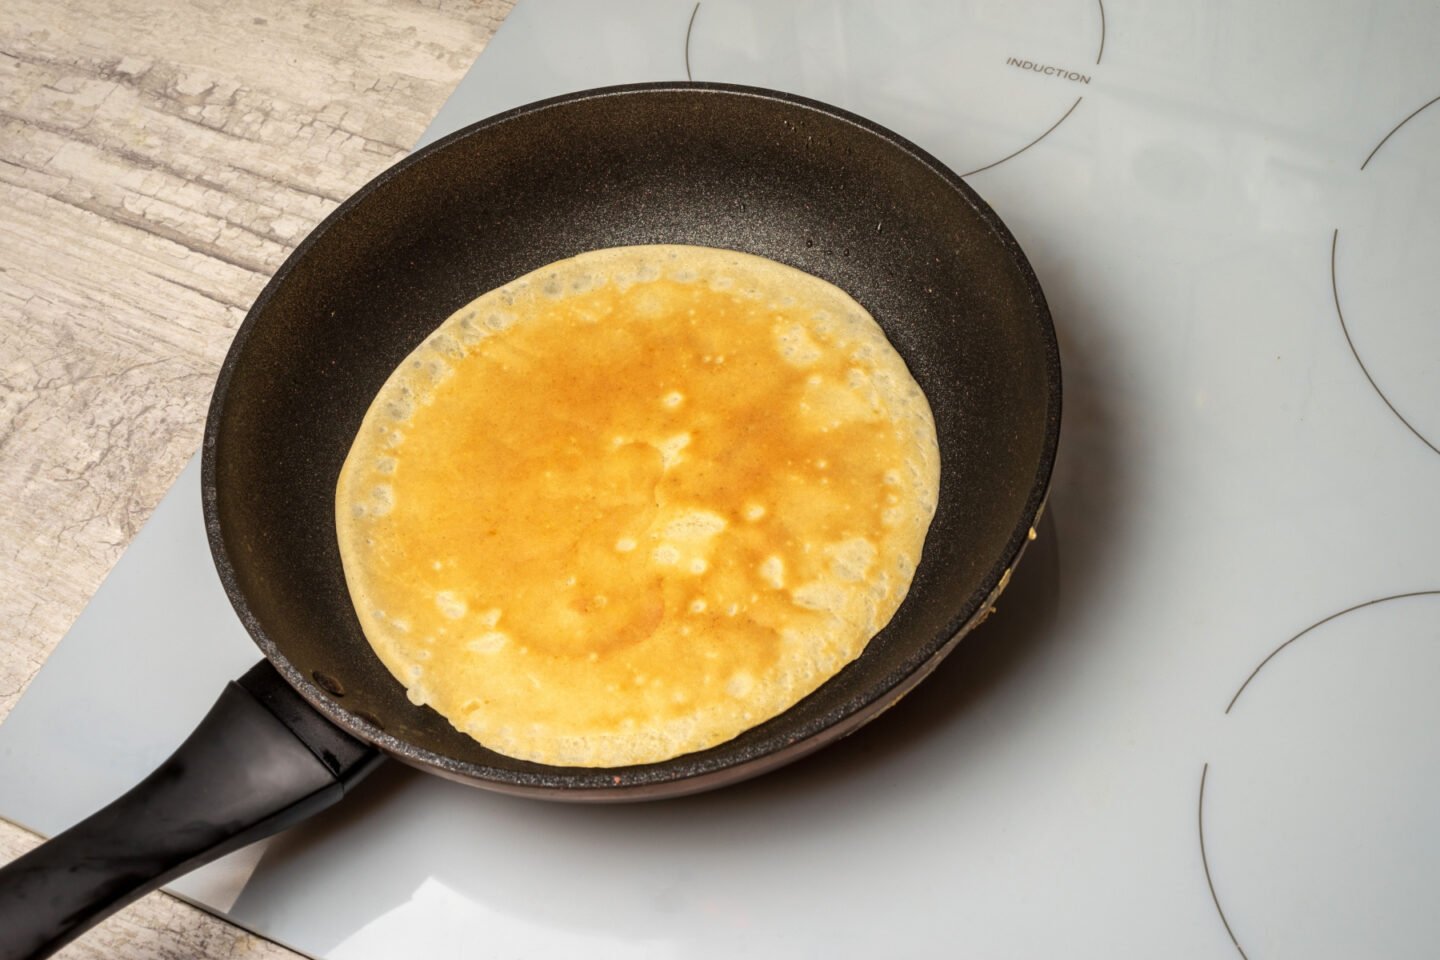 cooking omelette on ceramic coated pan